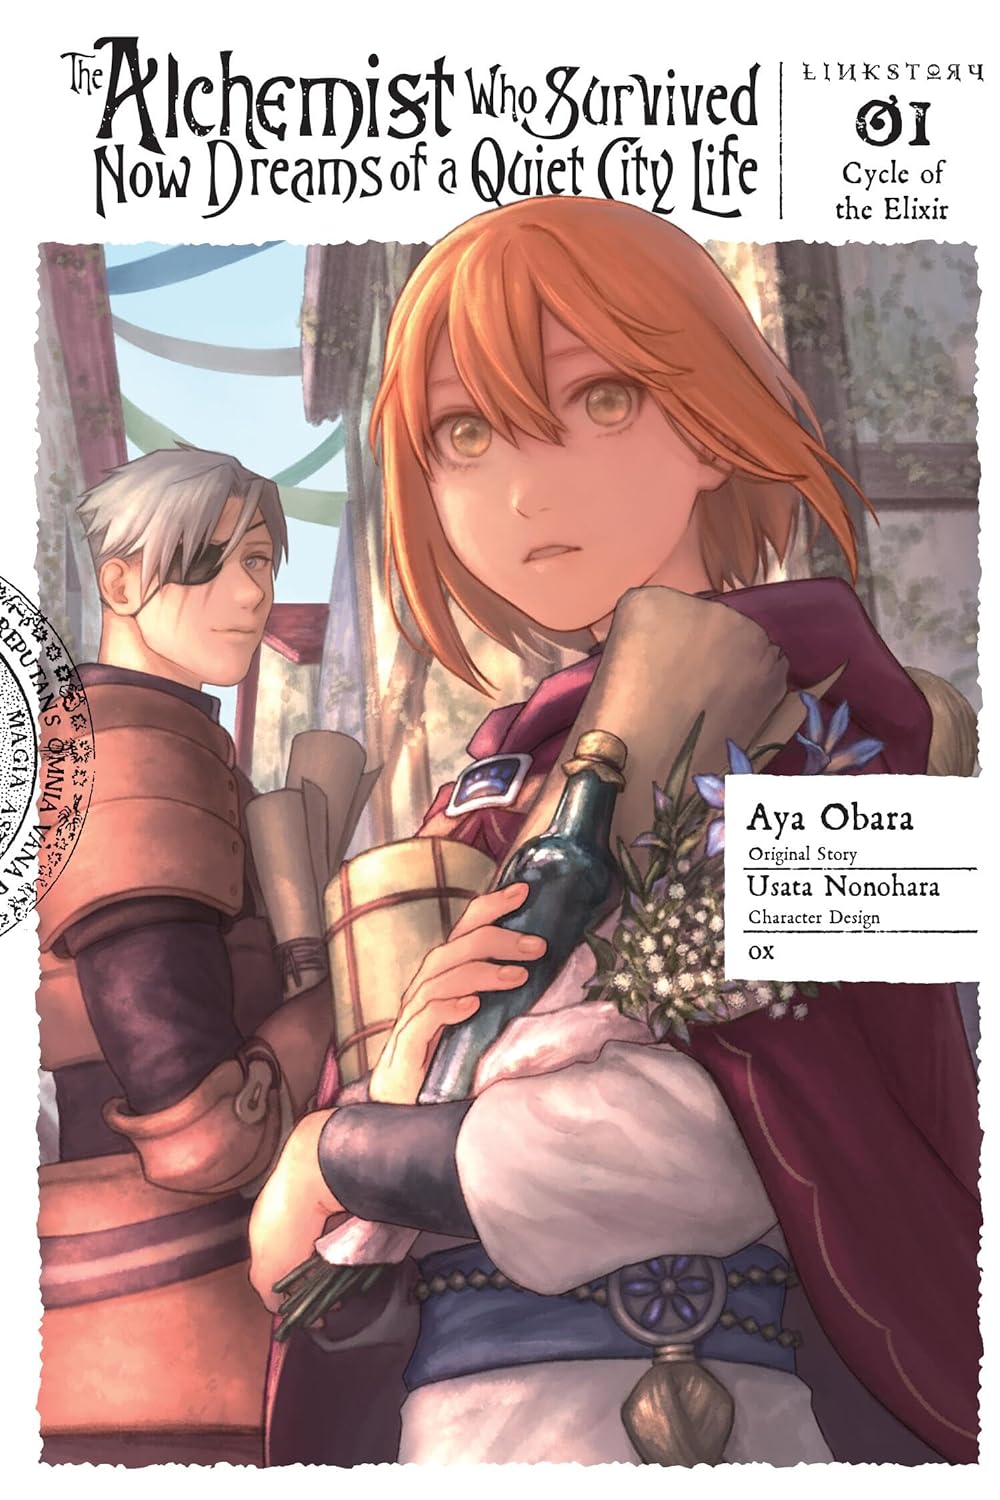 The Alchemist Who Survived Now Dreams of a Quiet City Life Vol. 01 (Manga): Cycle of the Elixir